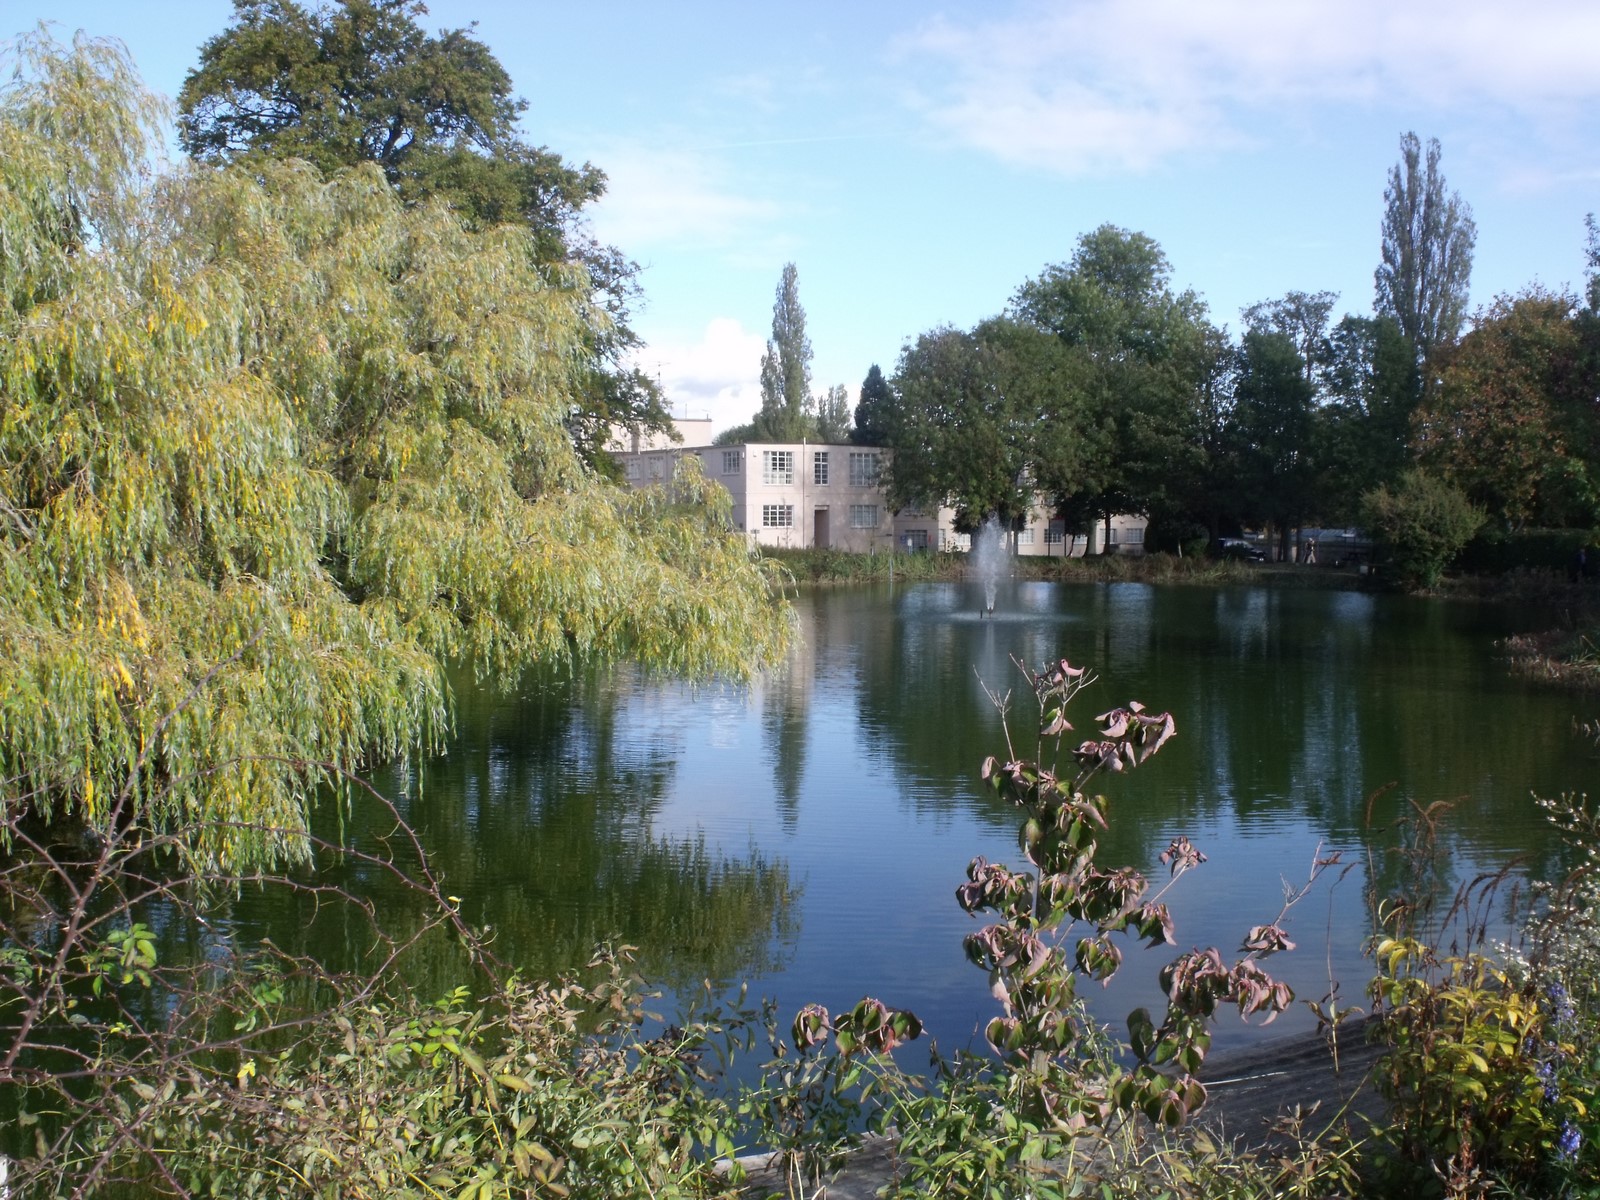 This is the lake at Bletchley Park